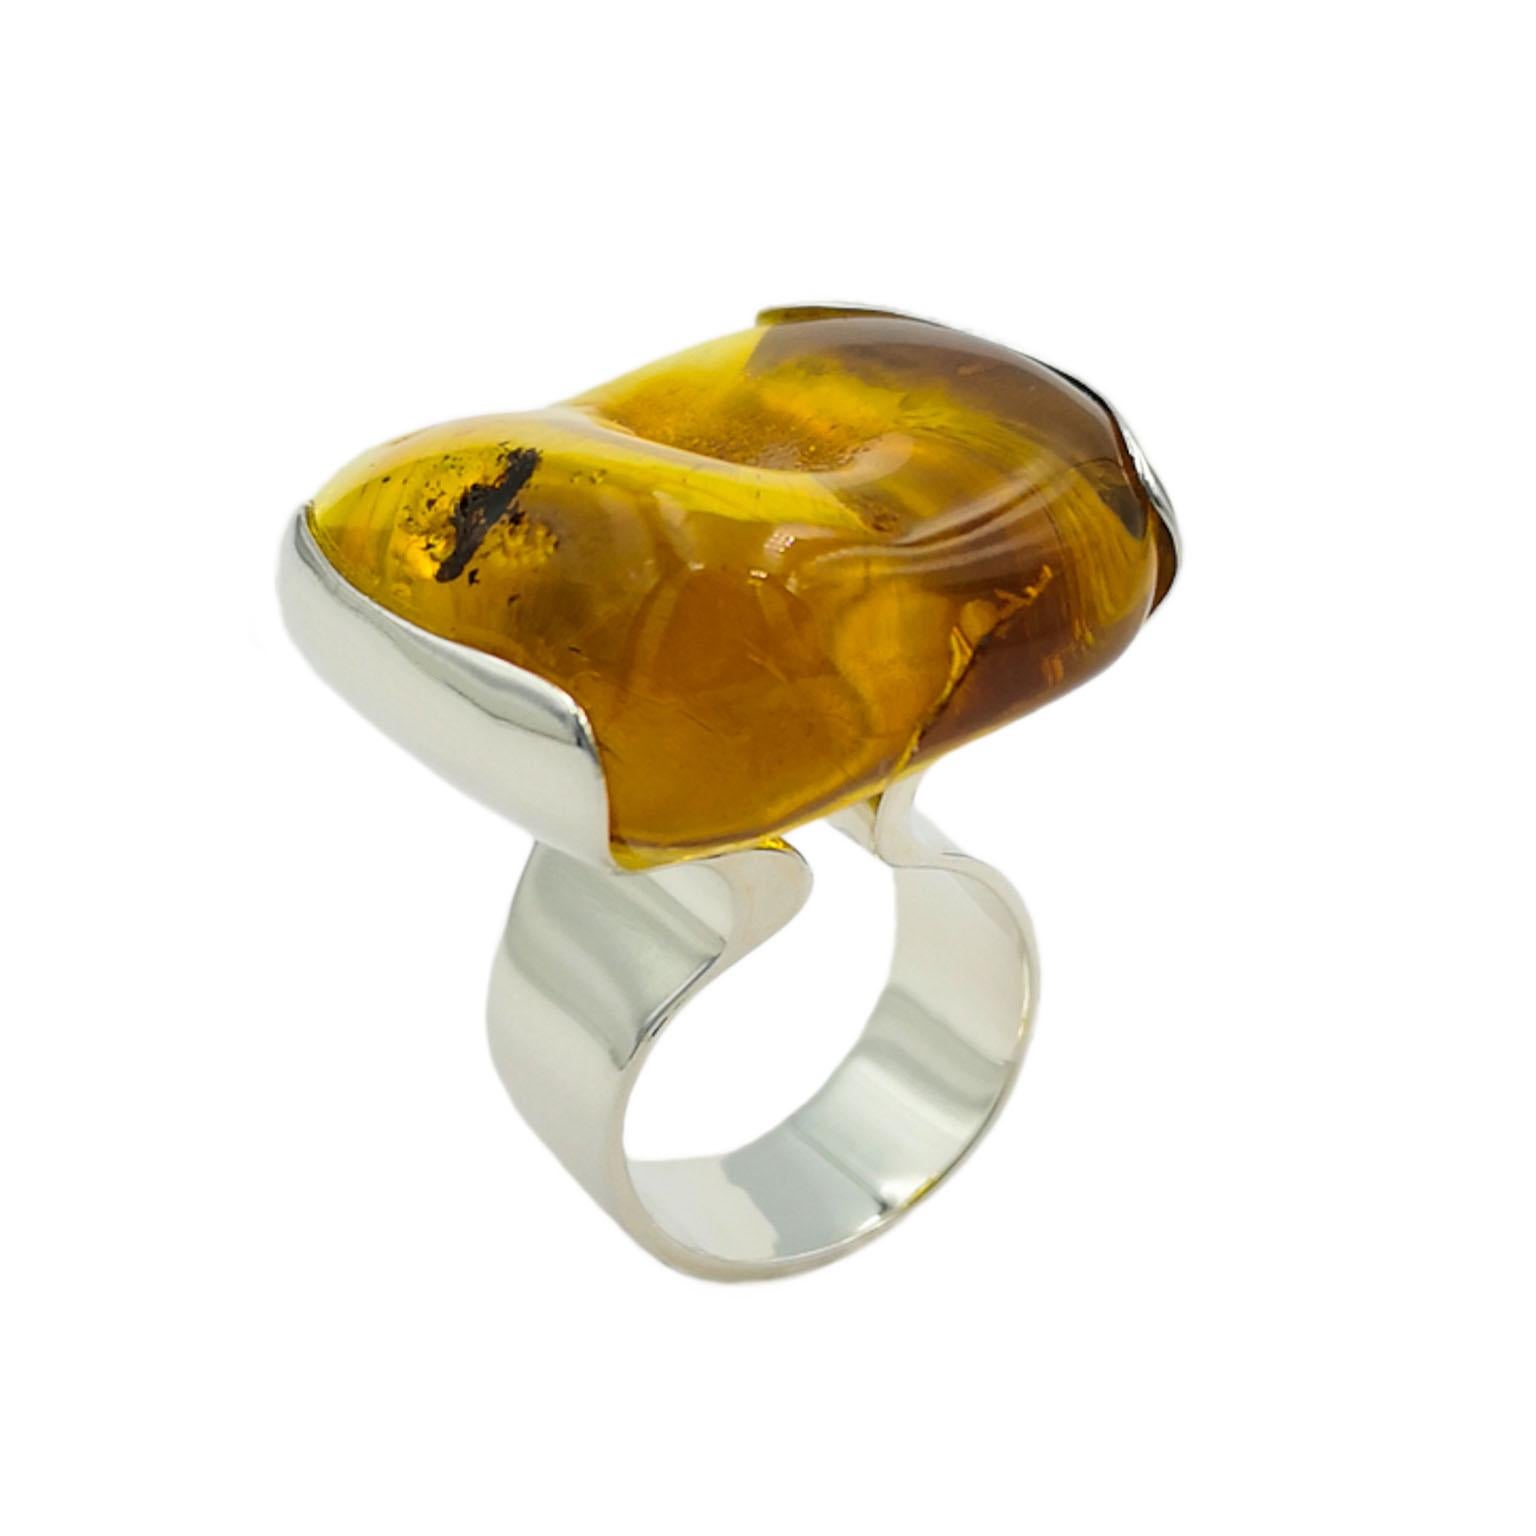 Natural Baltic Amber Silver Ring Artist Hand Made Design Rings
Beautiful, sunny, natural amber with a naturally formed cavity, framed in a sculptural silver form. Tall, majestic, but very comfortable.
A ring made of polished silver from the unique